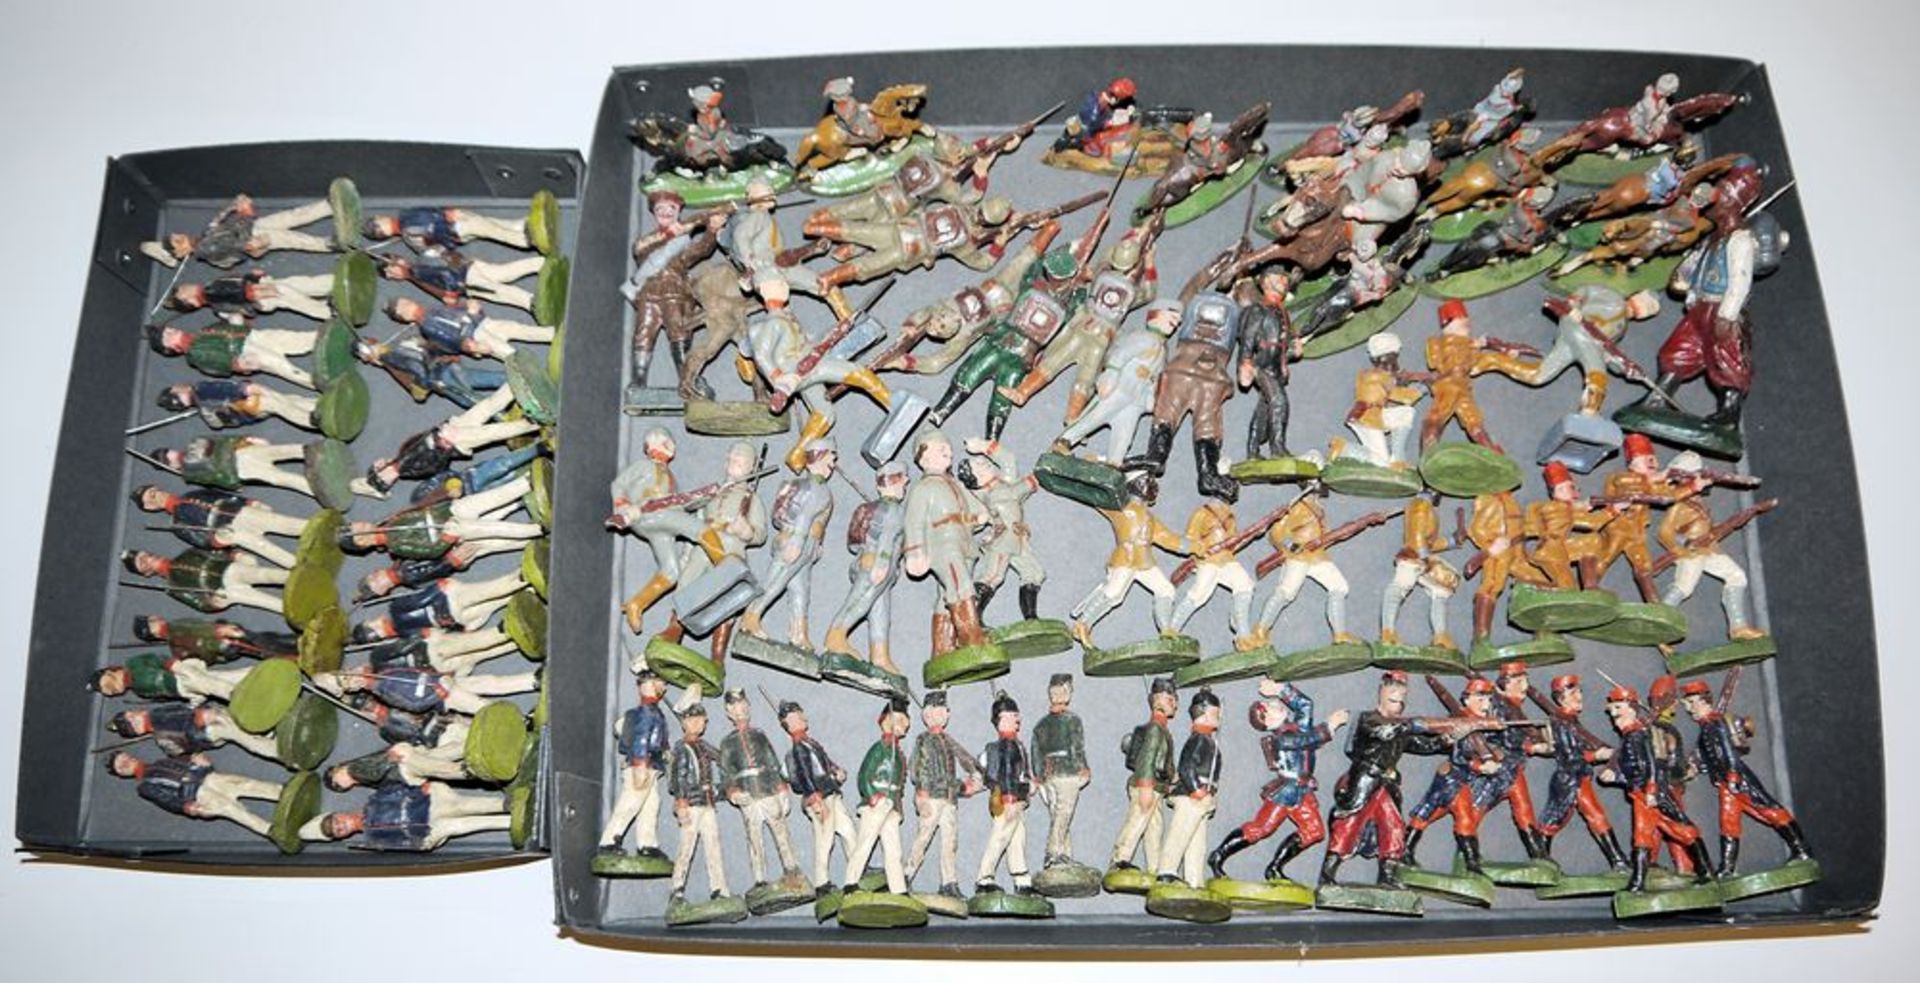 Üover 80 massed soldiers of the imperial period